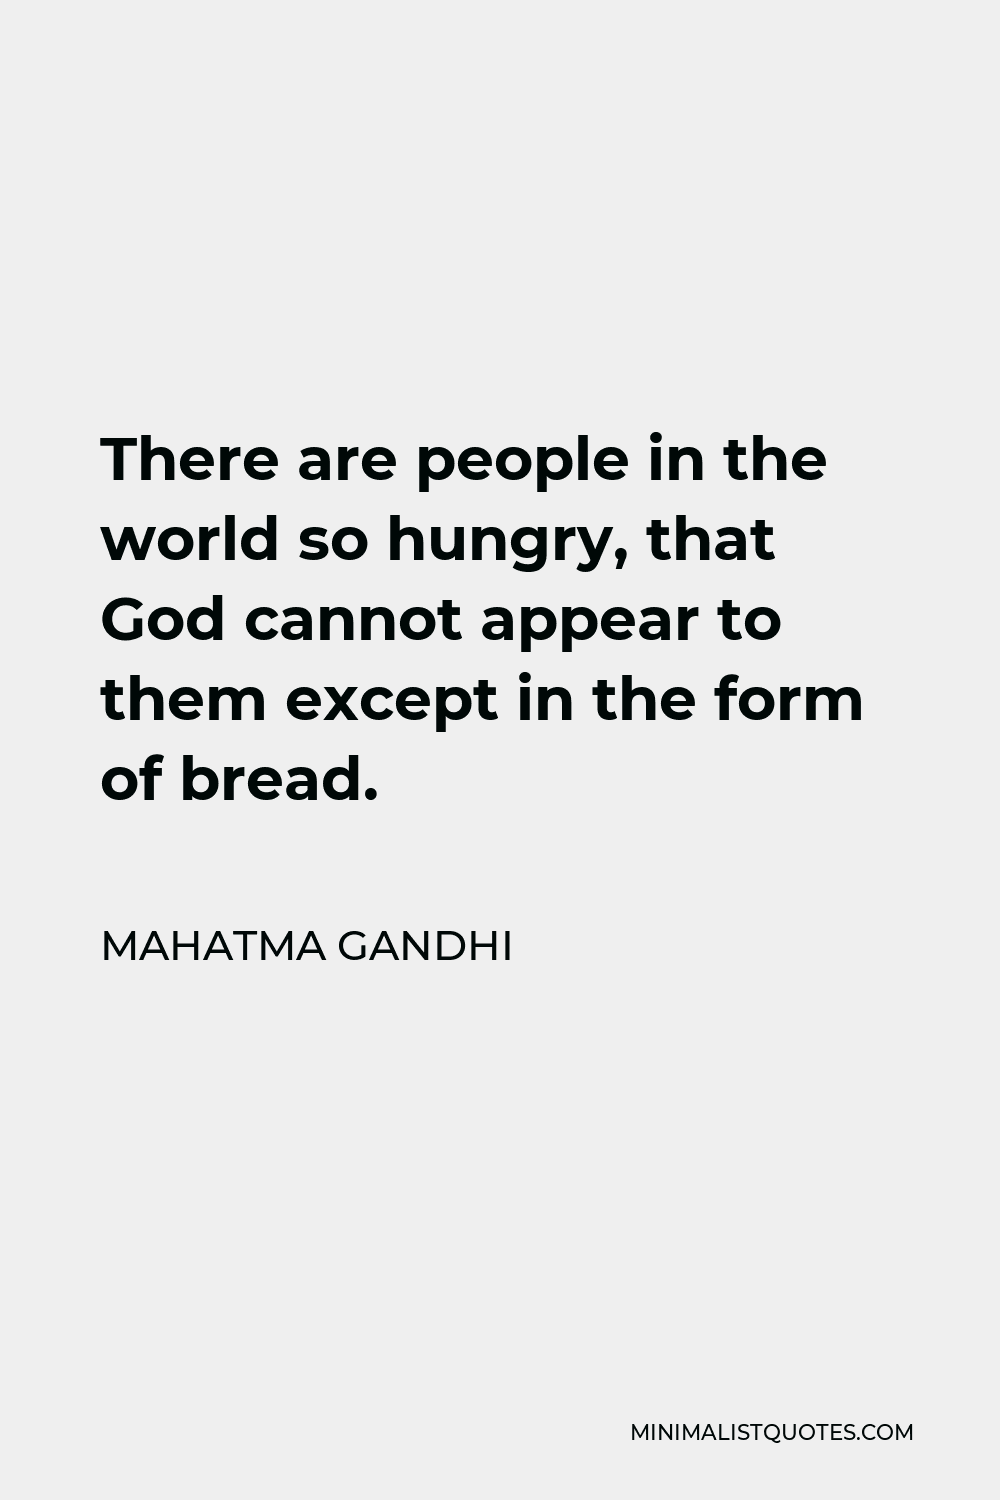 Mahatma Gandhi Quote - There are people in the world so hungry, that God cannot appear to them except in the form of bread.